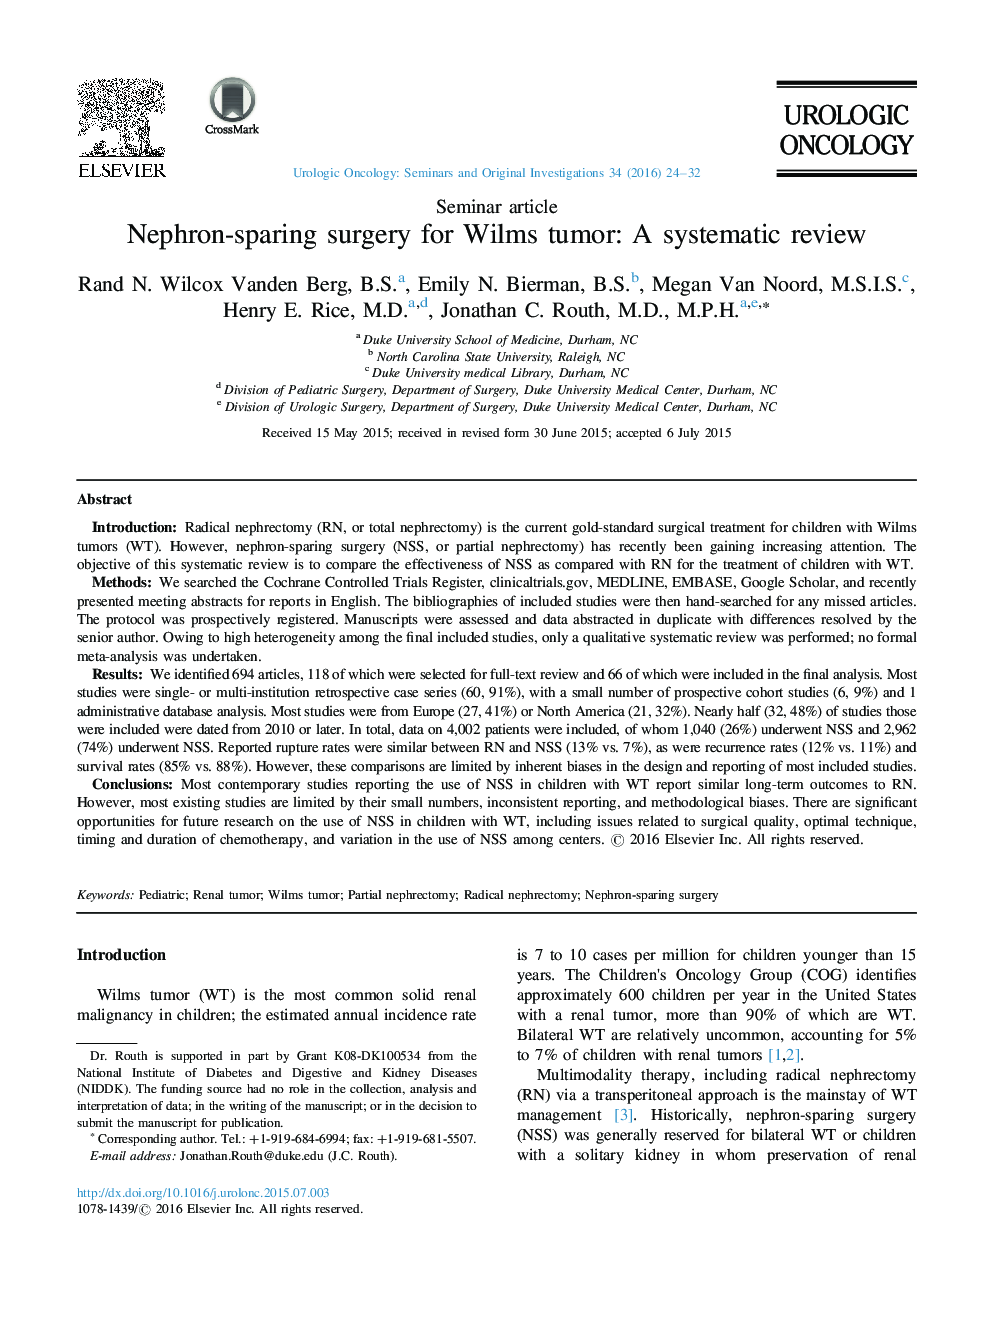 Nephron-sparing surgery for Wilms tumor: A systematic review 